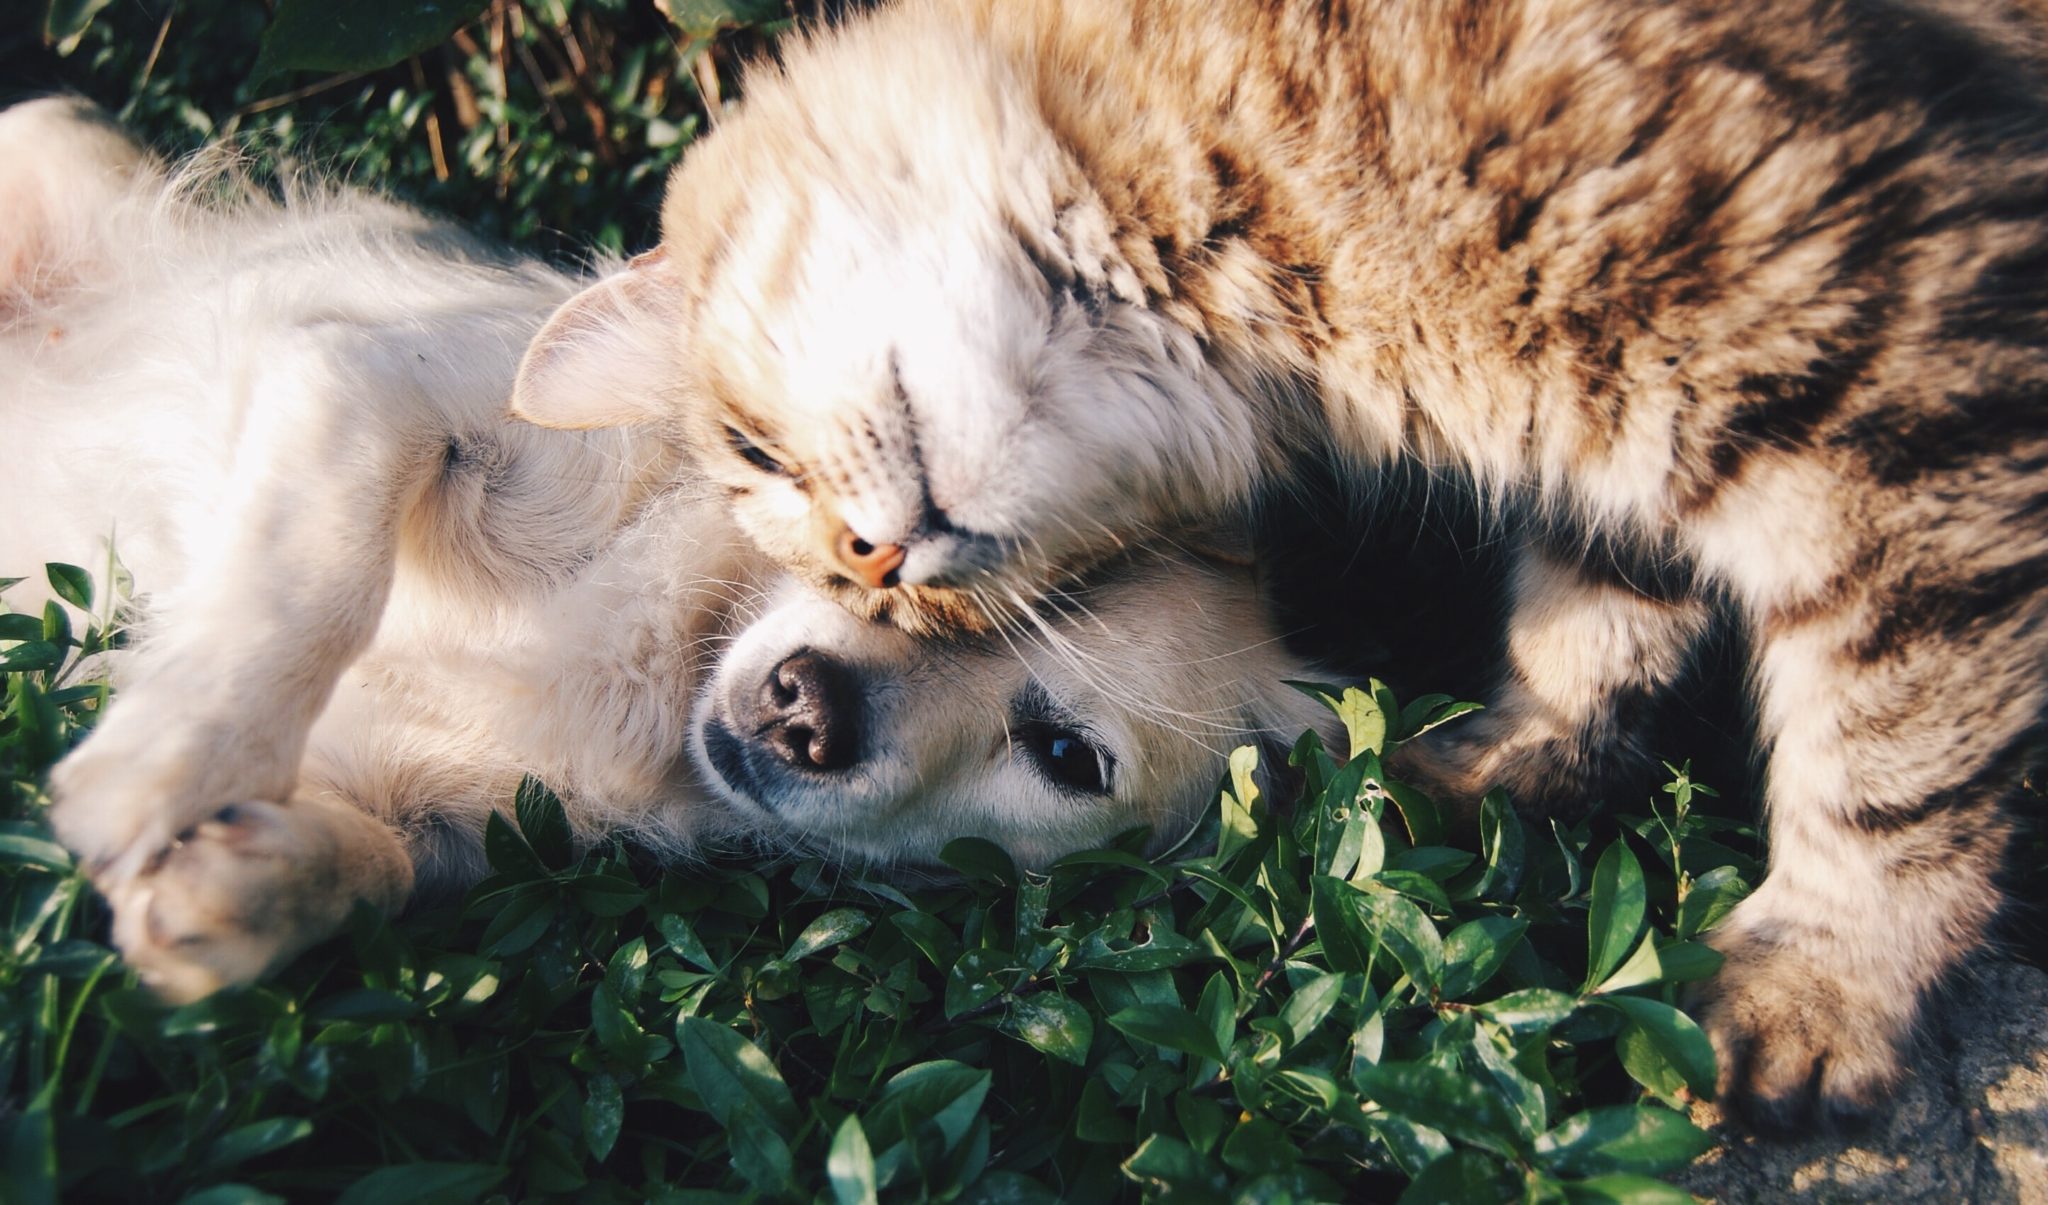 CBD as a Way to Help Pets with Separation Anxiety